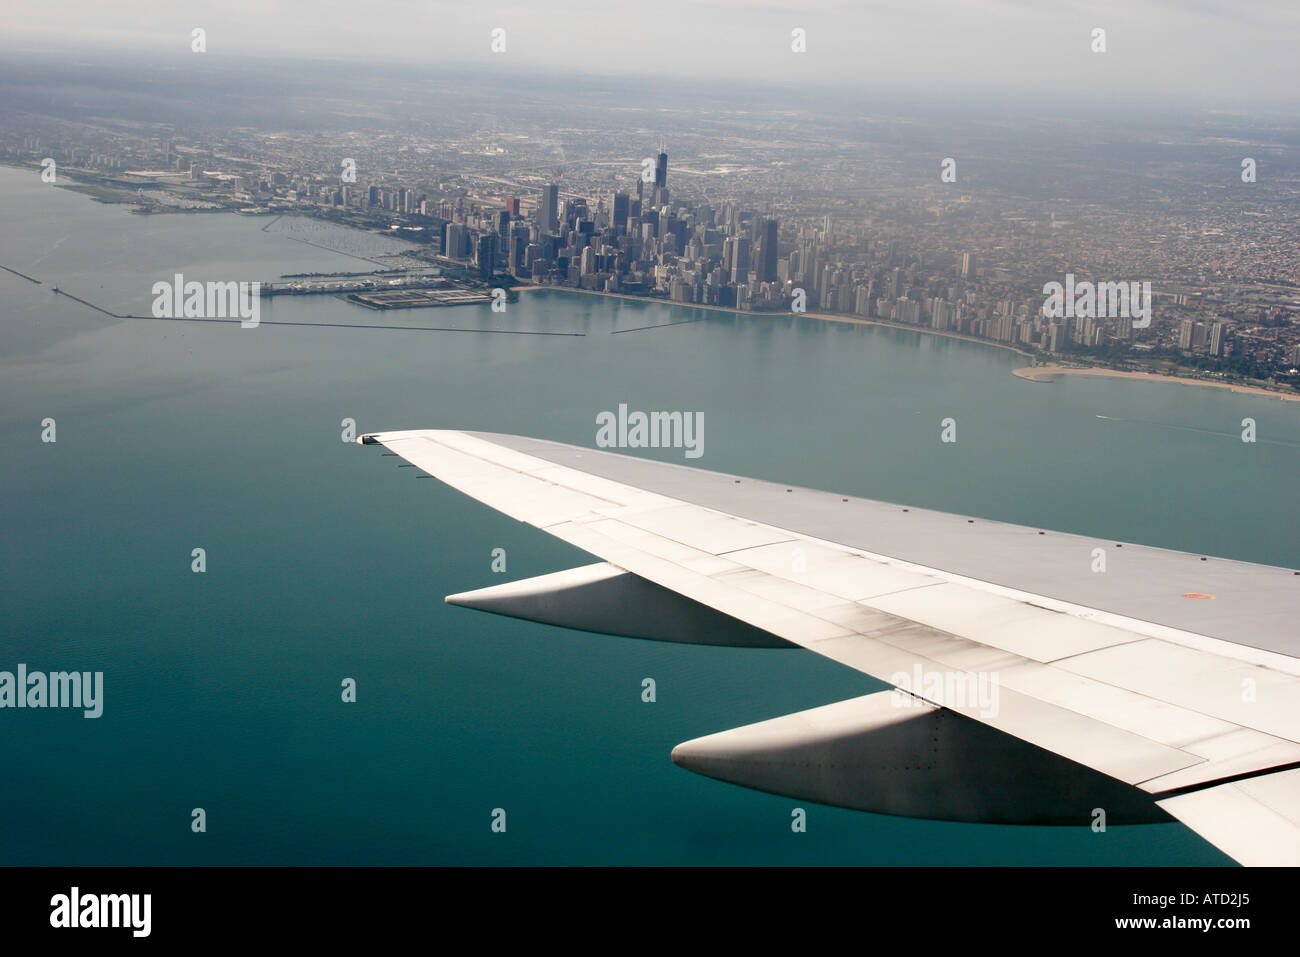 Illinois,il,Upper Midwest,Prairie State,Land of Lincoln,Cook County,Chicago,Lake Michigan,American Airlines,vol de Miami,WiNG,vie aérienne Banque D'Images